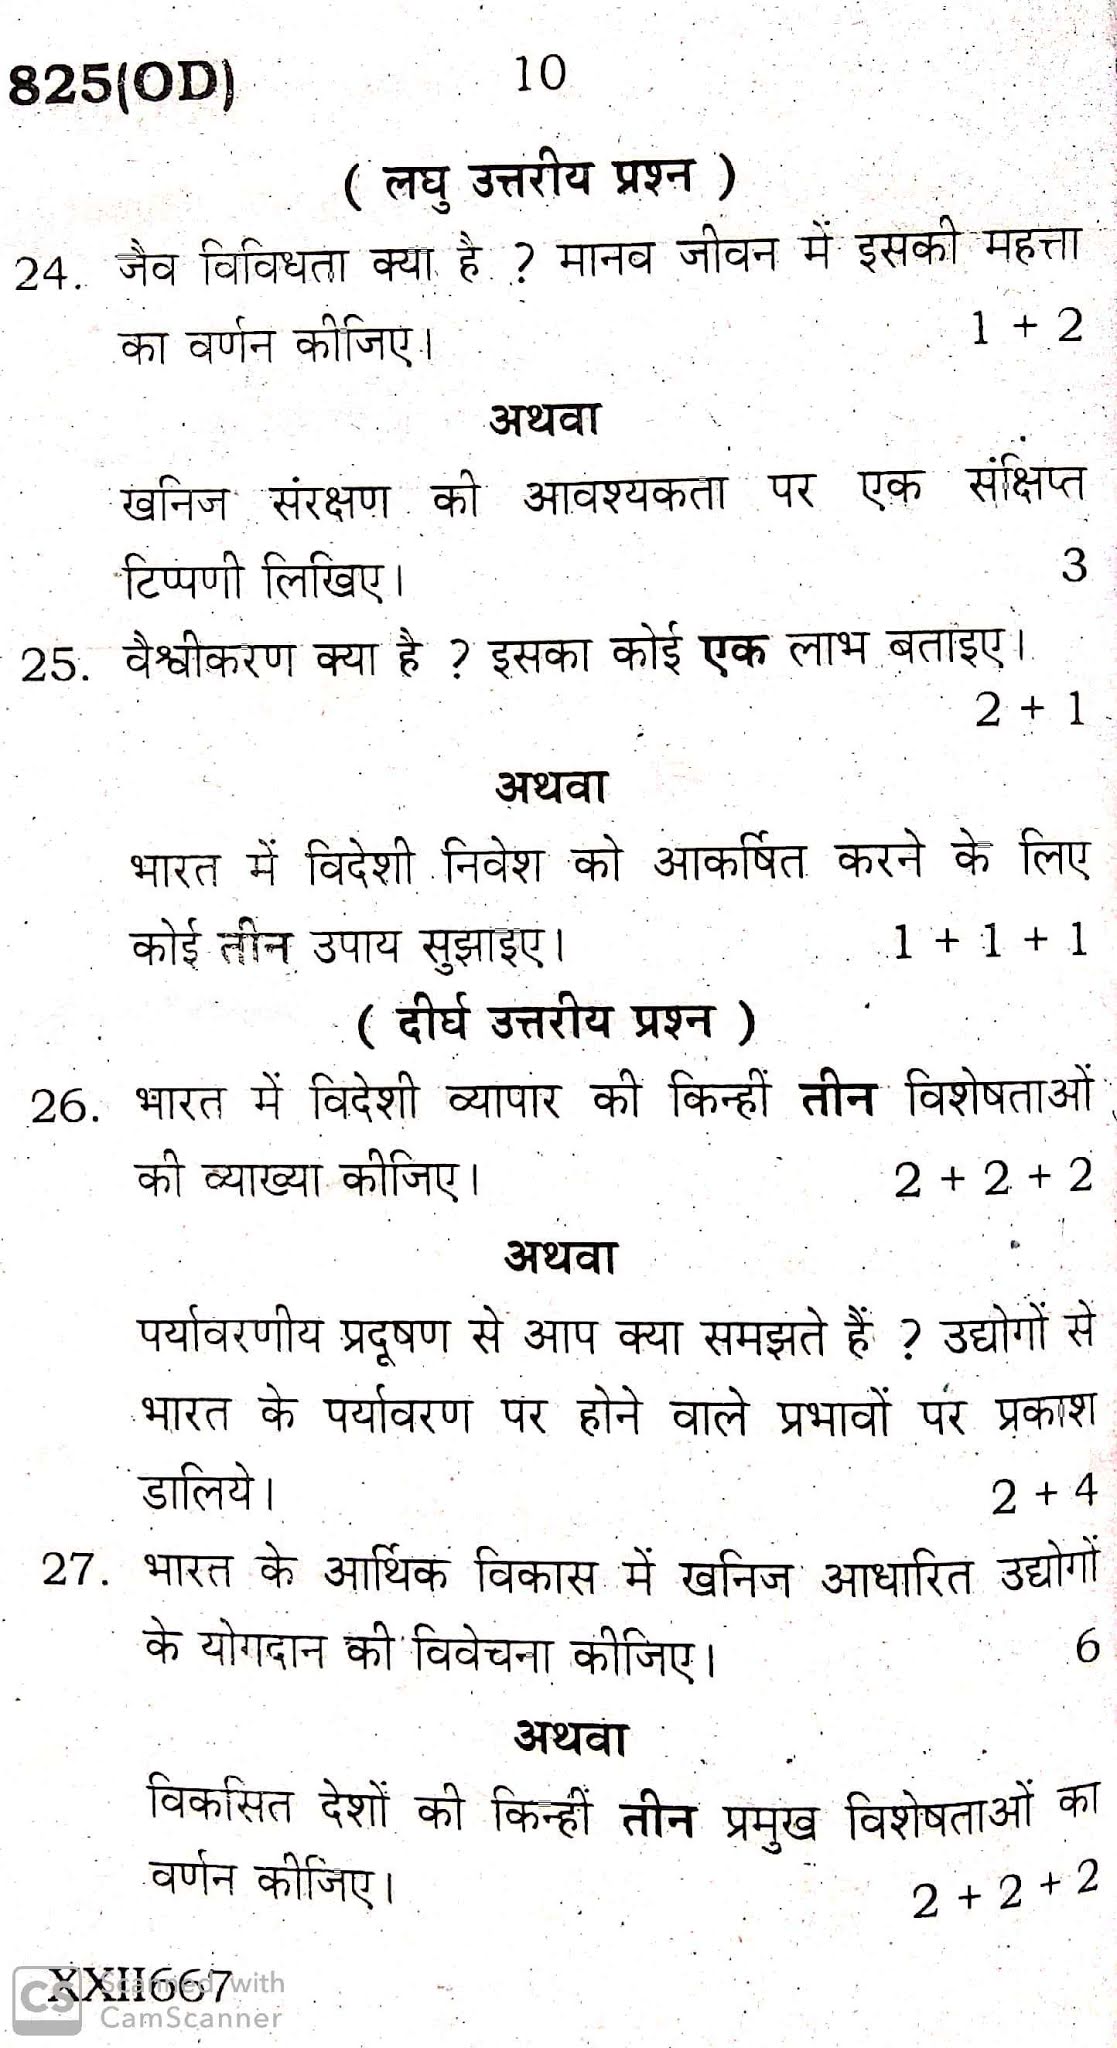 Social Science, UP Board question paper for 10th (High School), 2020 Examination